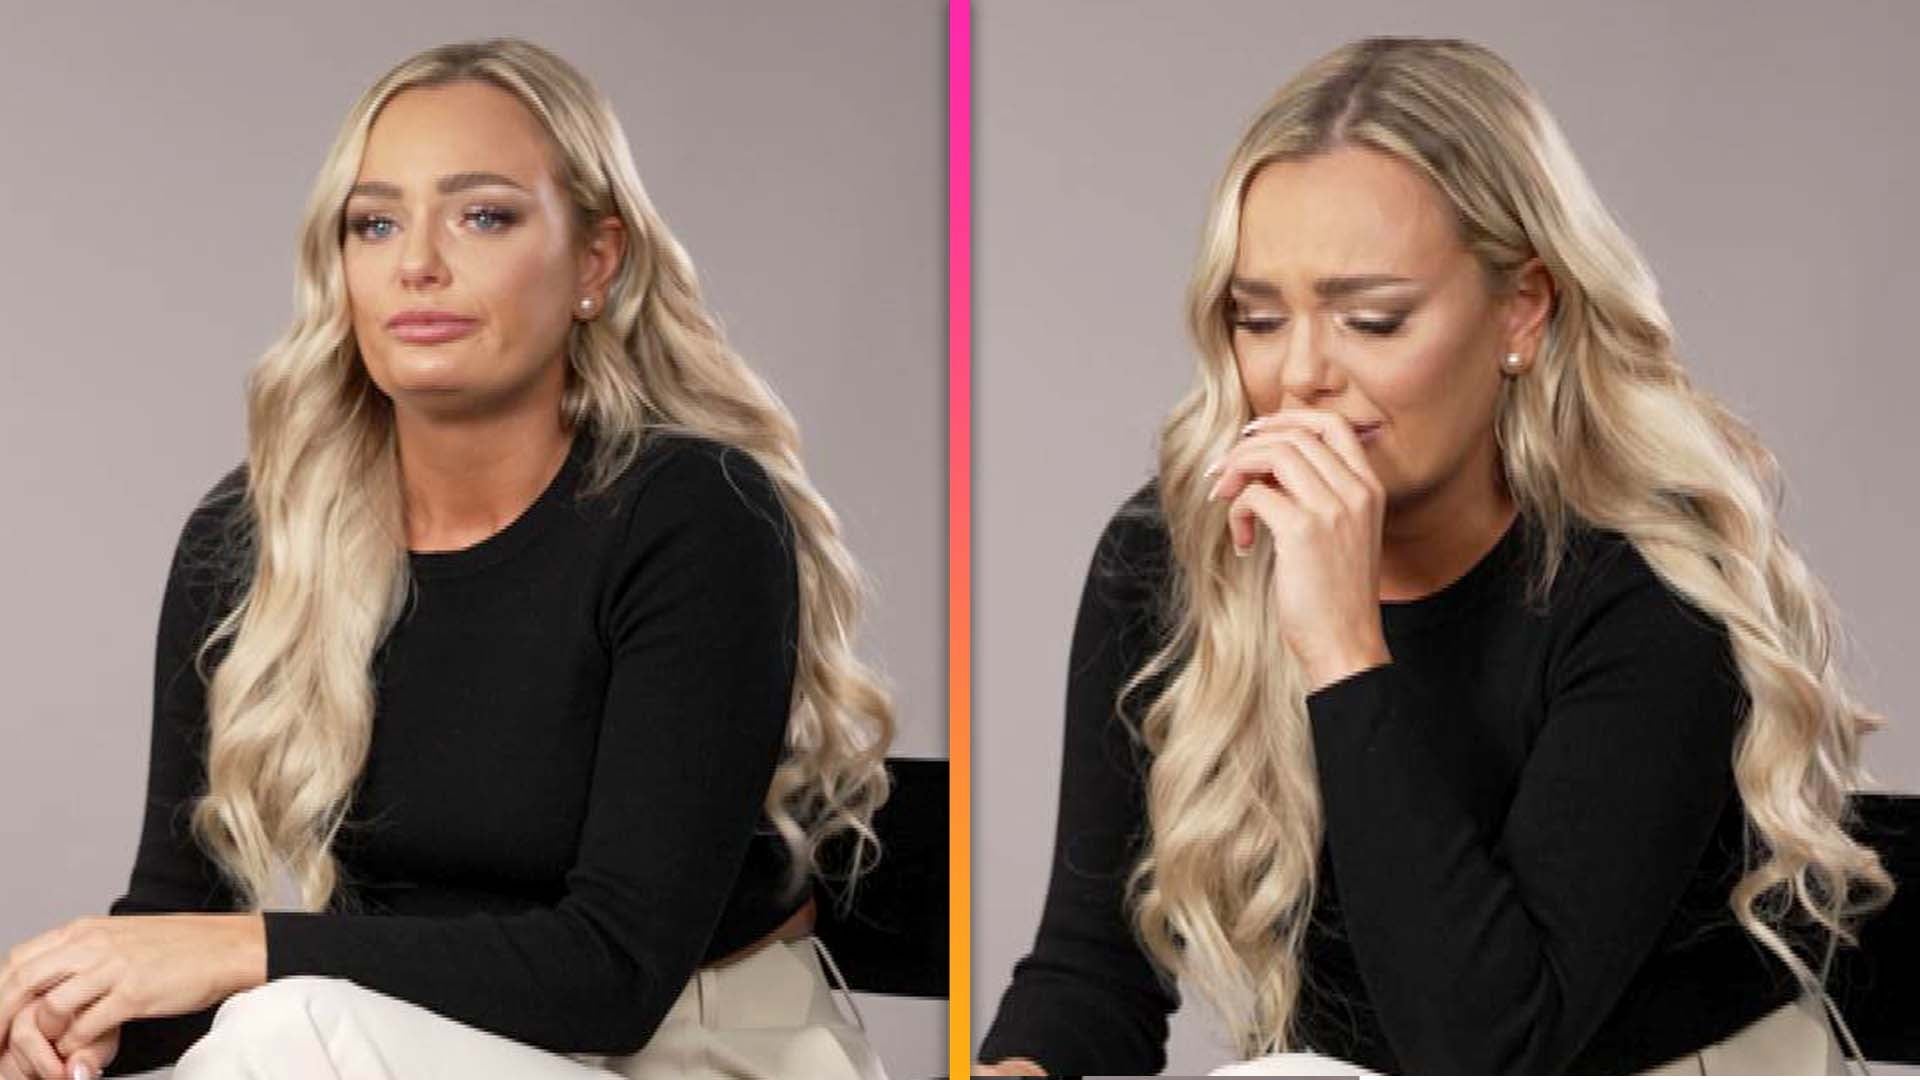 Micah Moore Group Sex Gallery - Love Is Blind' Star Micah Breaks Down in Tears Discussing Portrayal on the  Show (Exclusive)